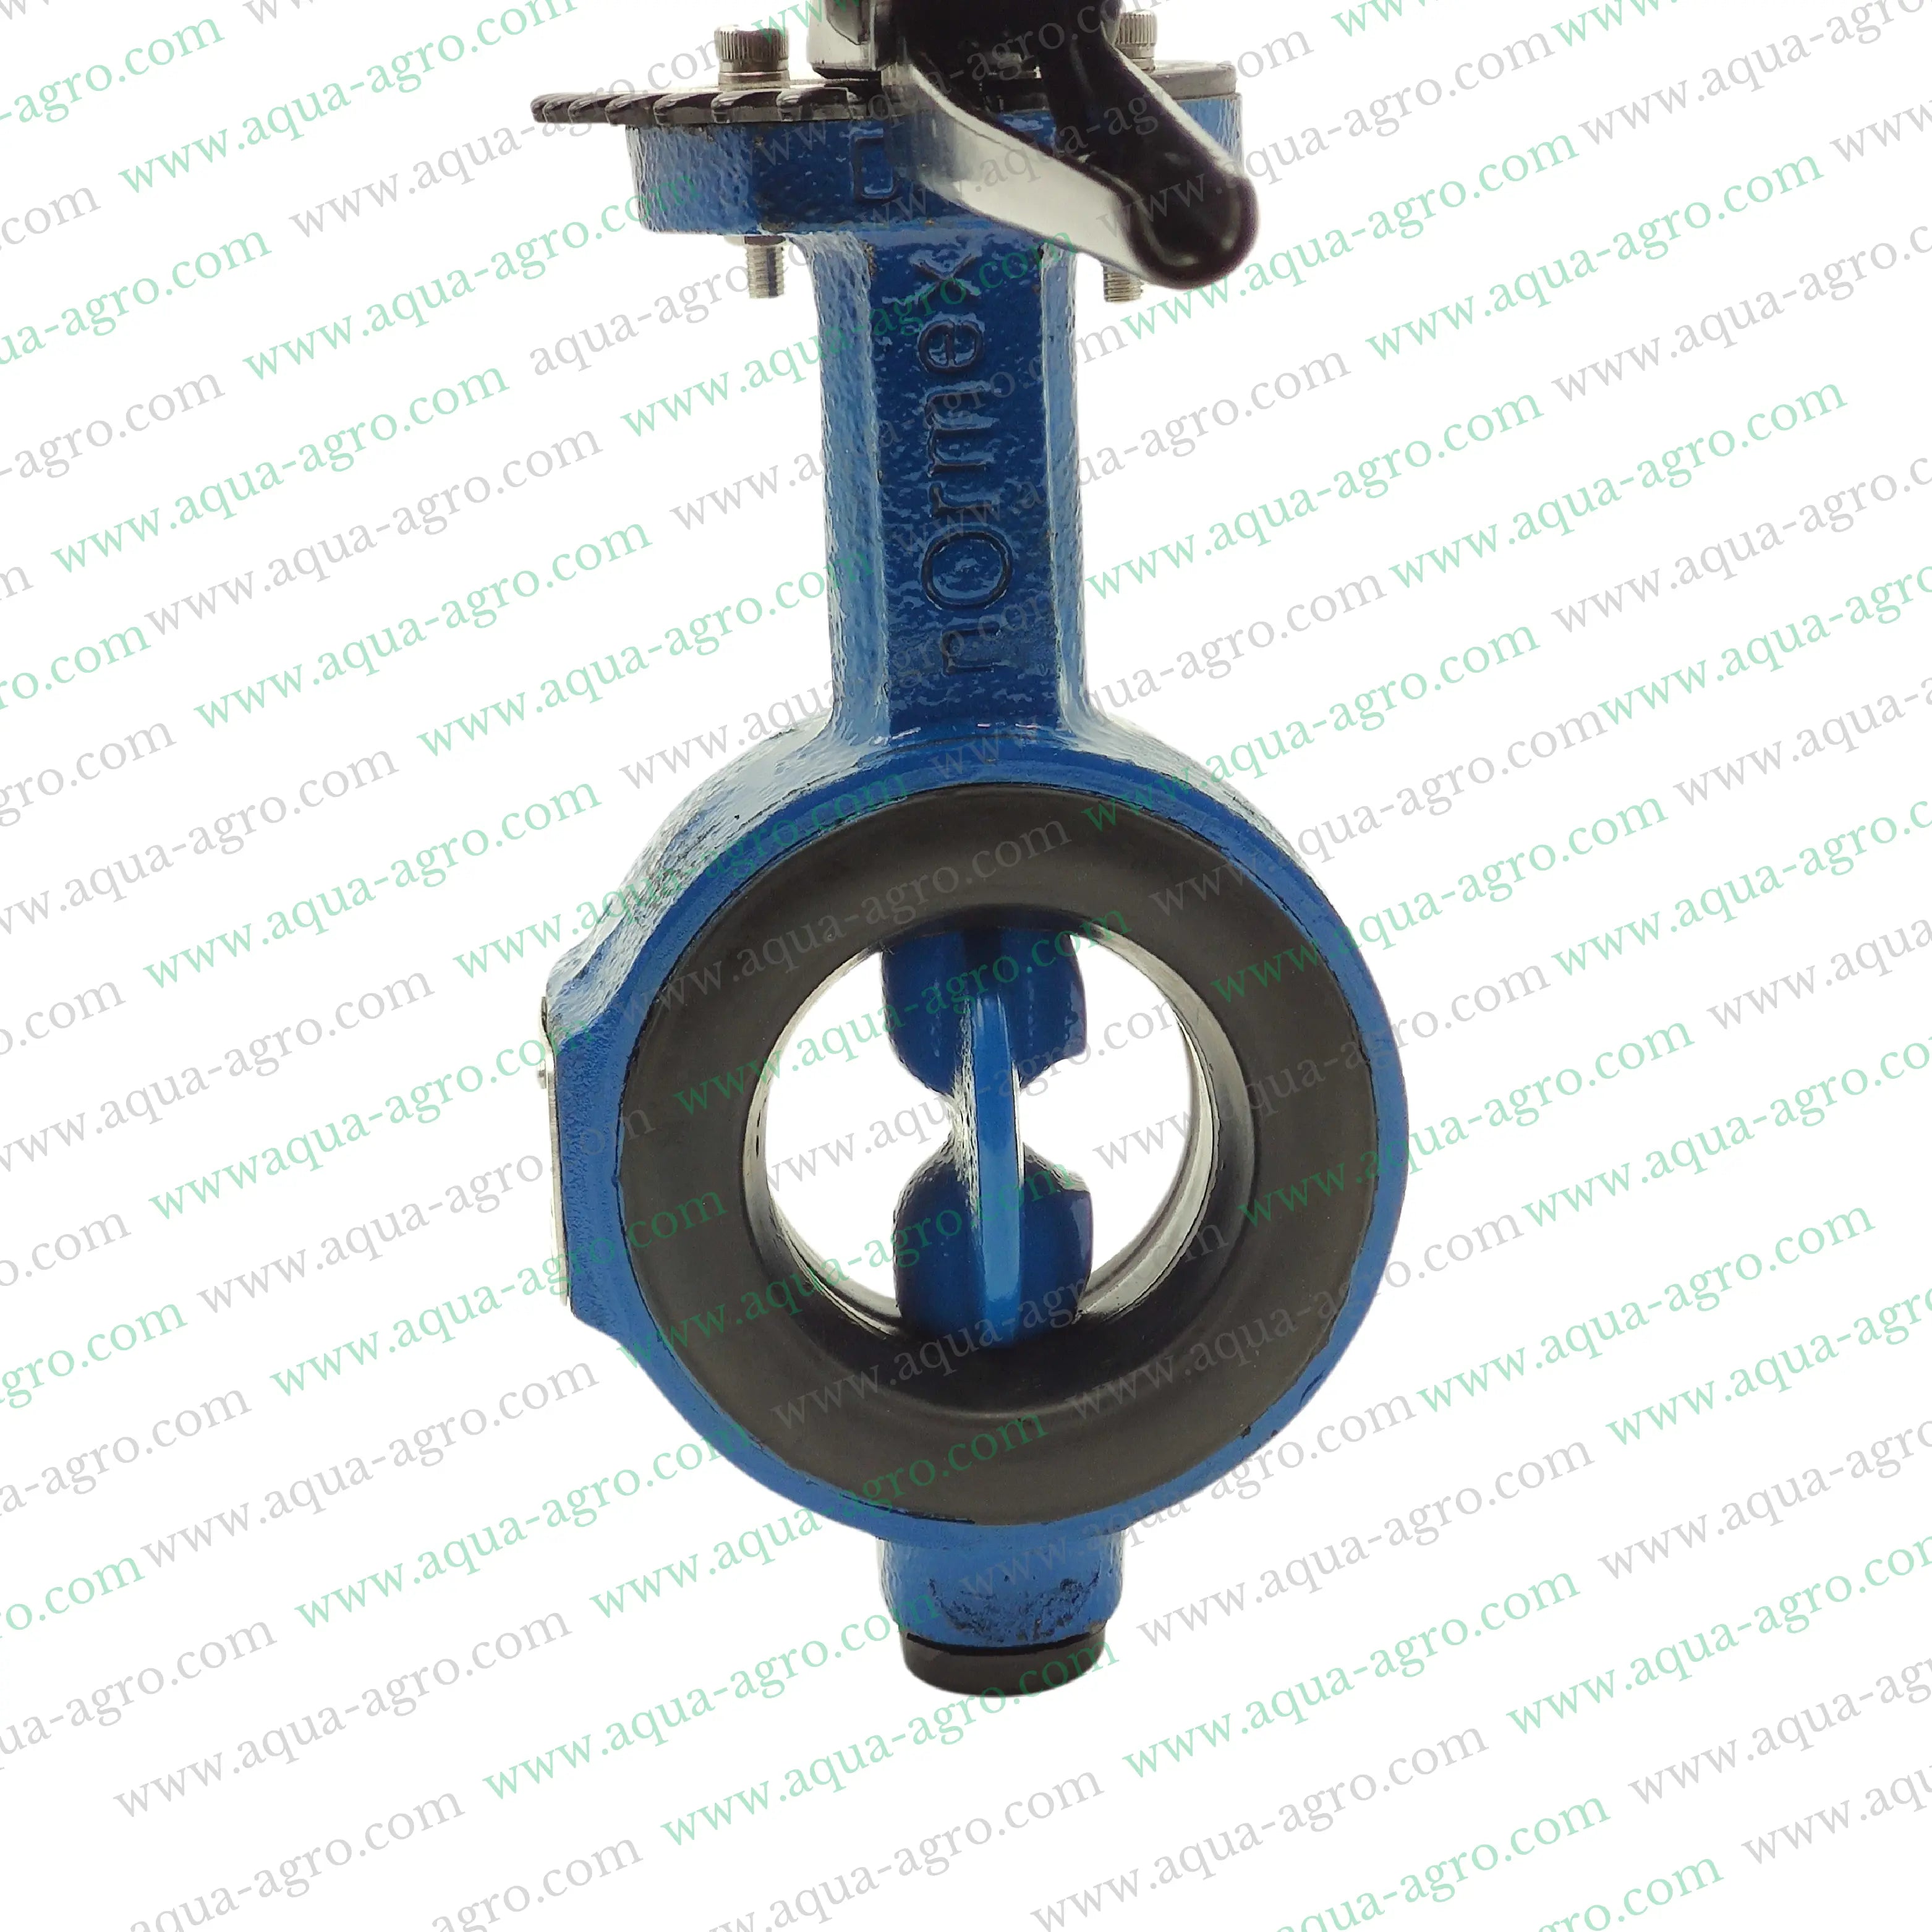 NORMEX | Valves - Butterfly Valves - Metal - C.I Body with SG Metal disc - 2" (50mm)